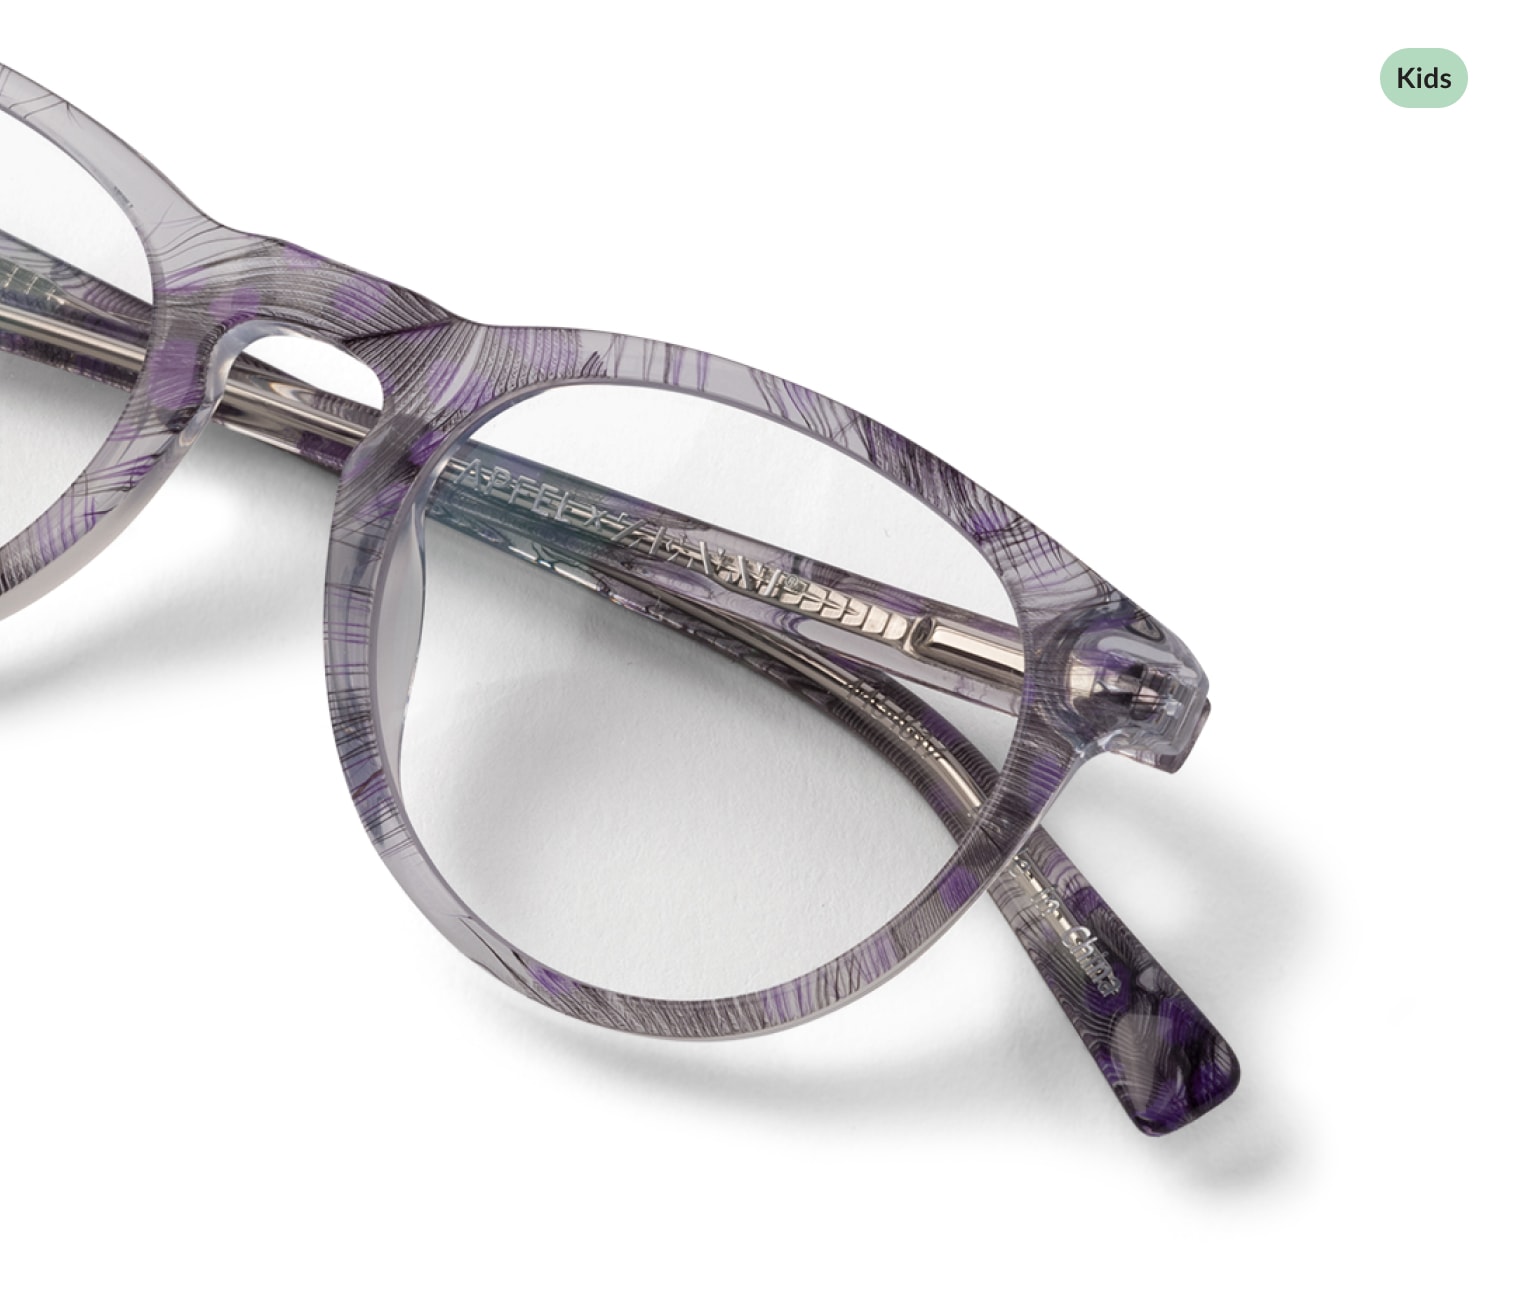 Black and purple feather-patterned transparent round glasses.